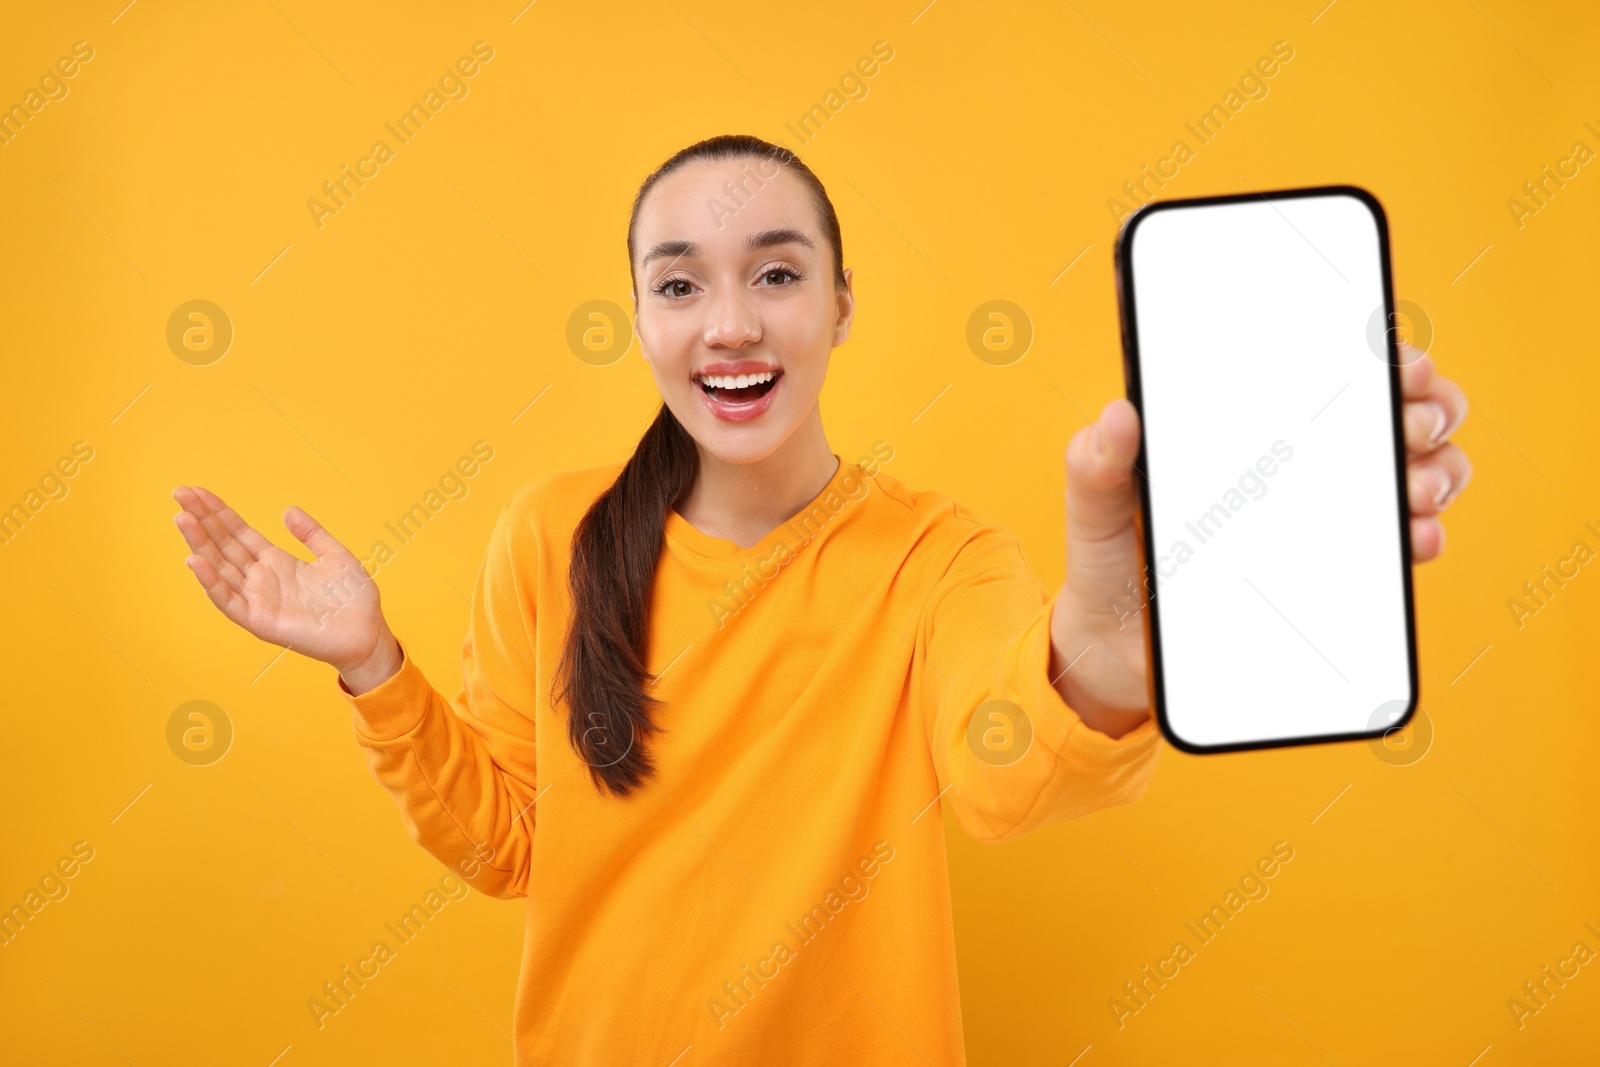 Photo of Surprised woman showing smartphone in hand on yellow background